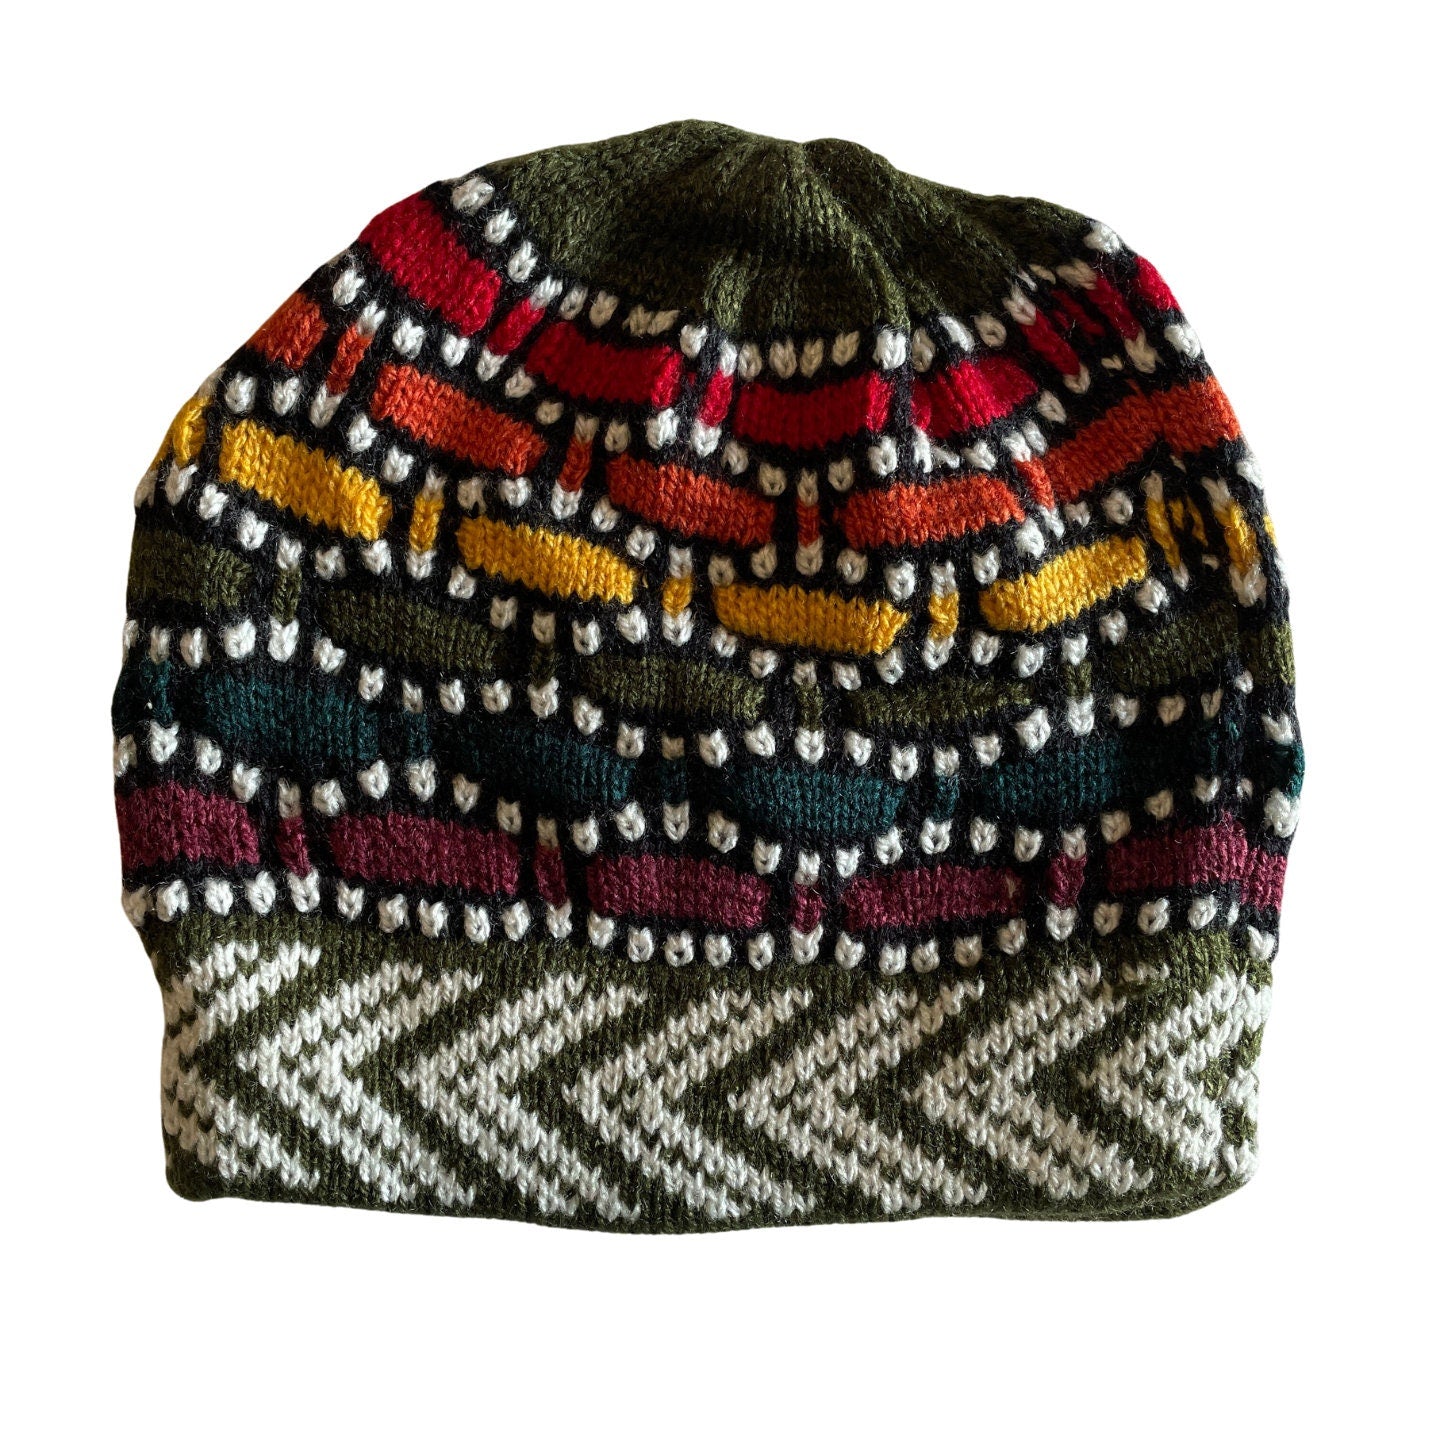 Colorful Knitted Alpaca Beanie Hat